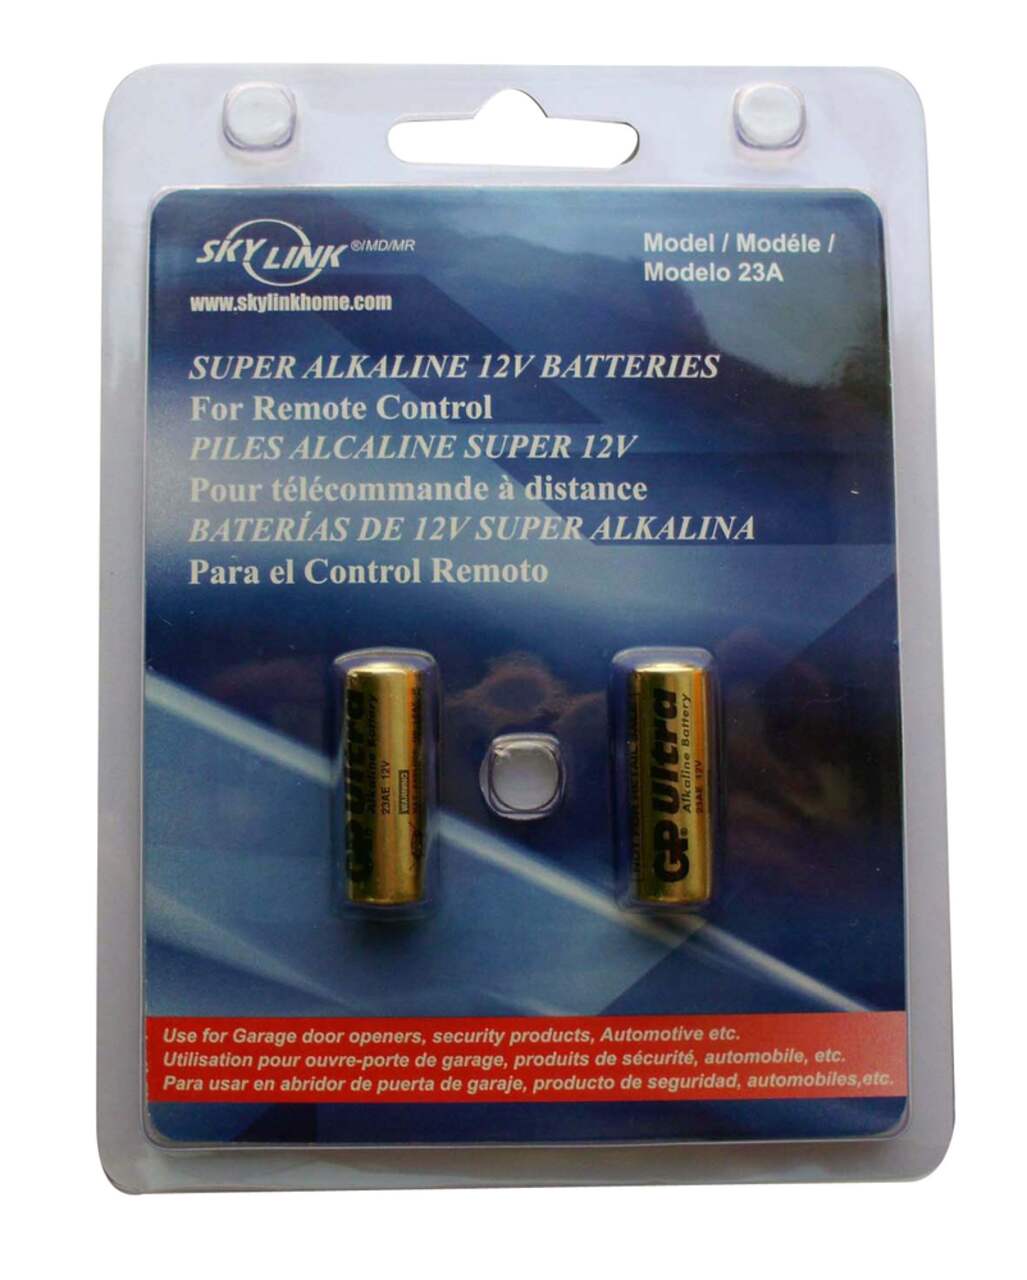 https://media-www.canadiantire.ca/product/fixing/tools/garage-organization/0460126/skylink-2-x-12v-alkaline-batteries-for-gdo-remotes-988d02ff-ae4c-4b0f-b650-a764da37f22a.png?imdensity=1&imwidth=640&impolicy=mZoom